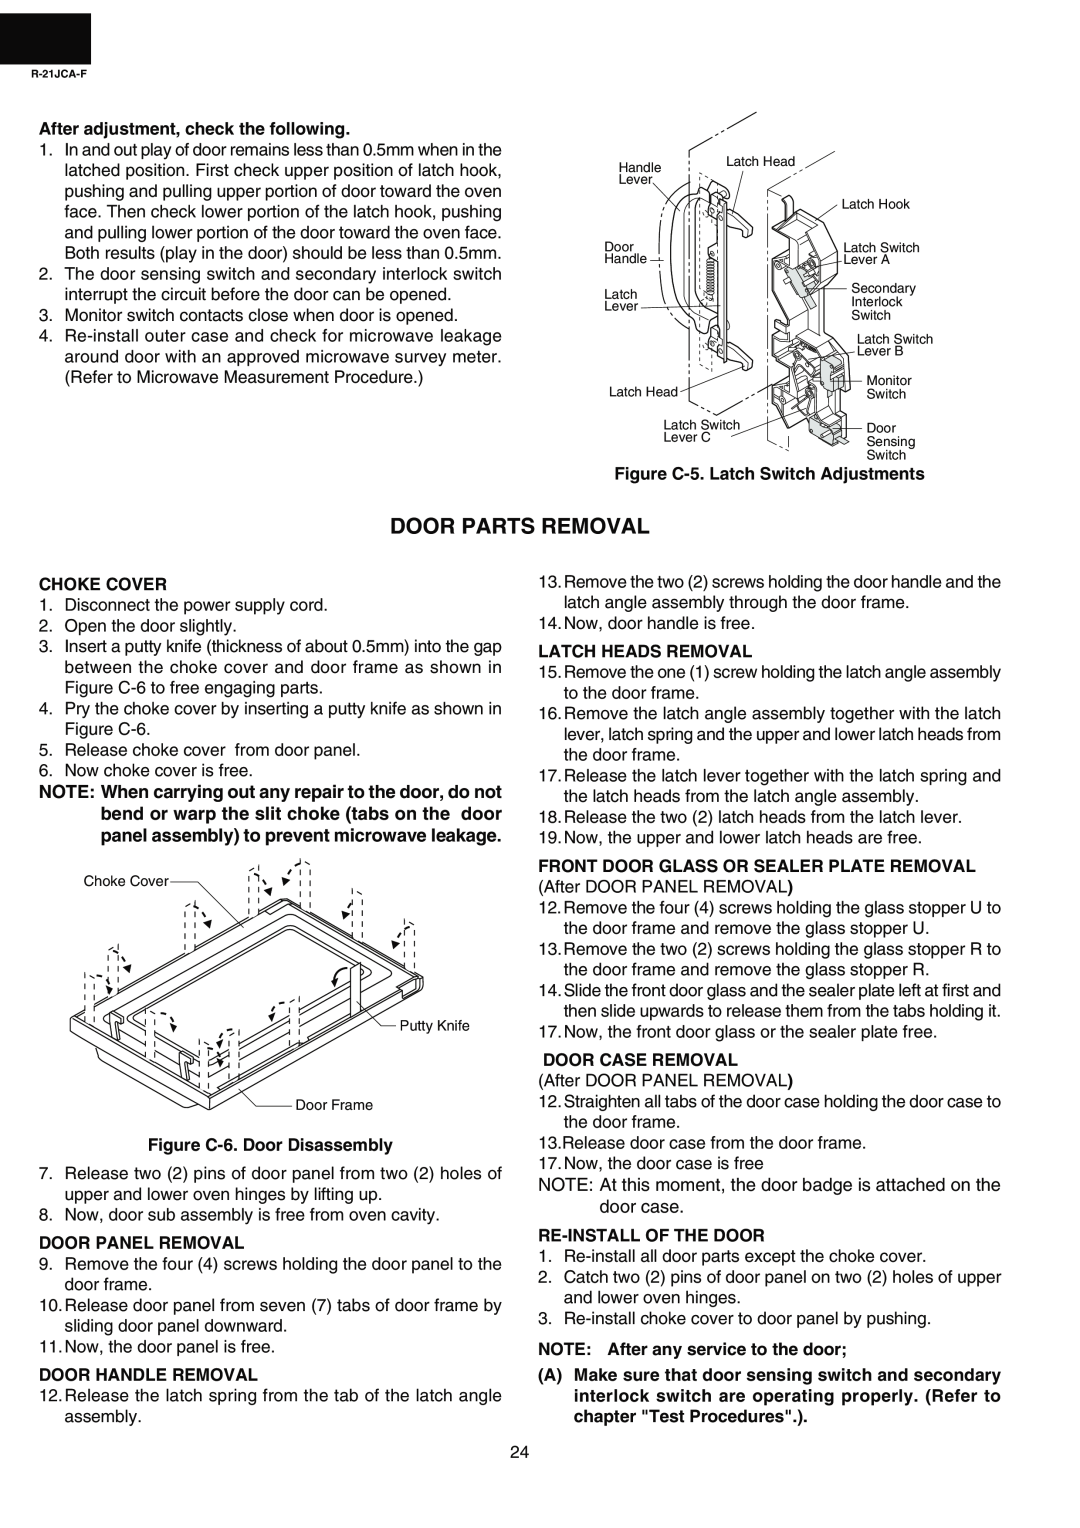 Sharp R-21JCA-F Door Parts Removal, After adjustment, check the following, Figure C-5. Latch Switch Adjustments 